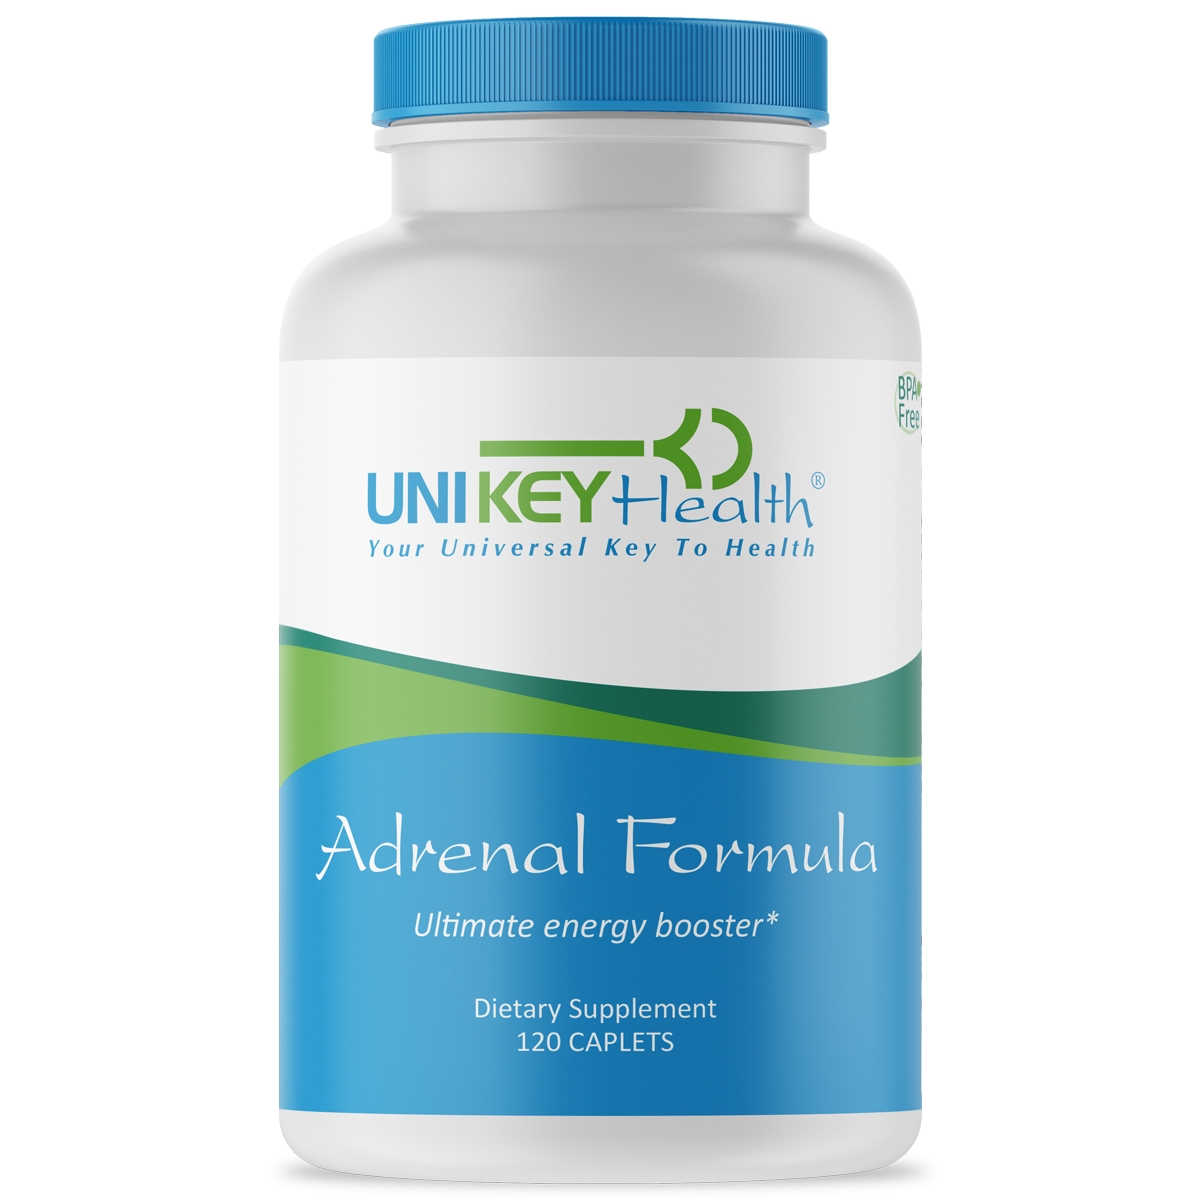 The front bottle of Adrenal Formula, an ultimate energy booster and natural dietary supplement for adrenal fatigue.